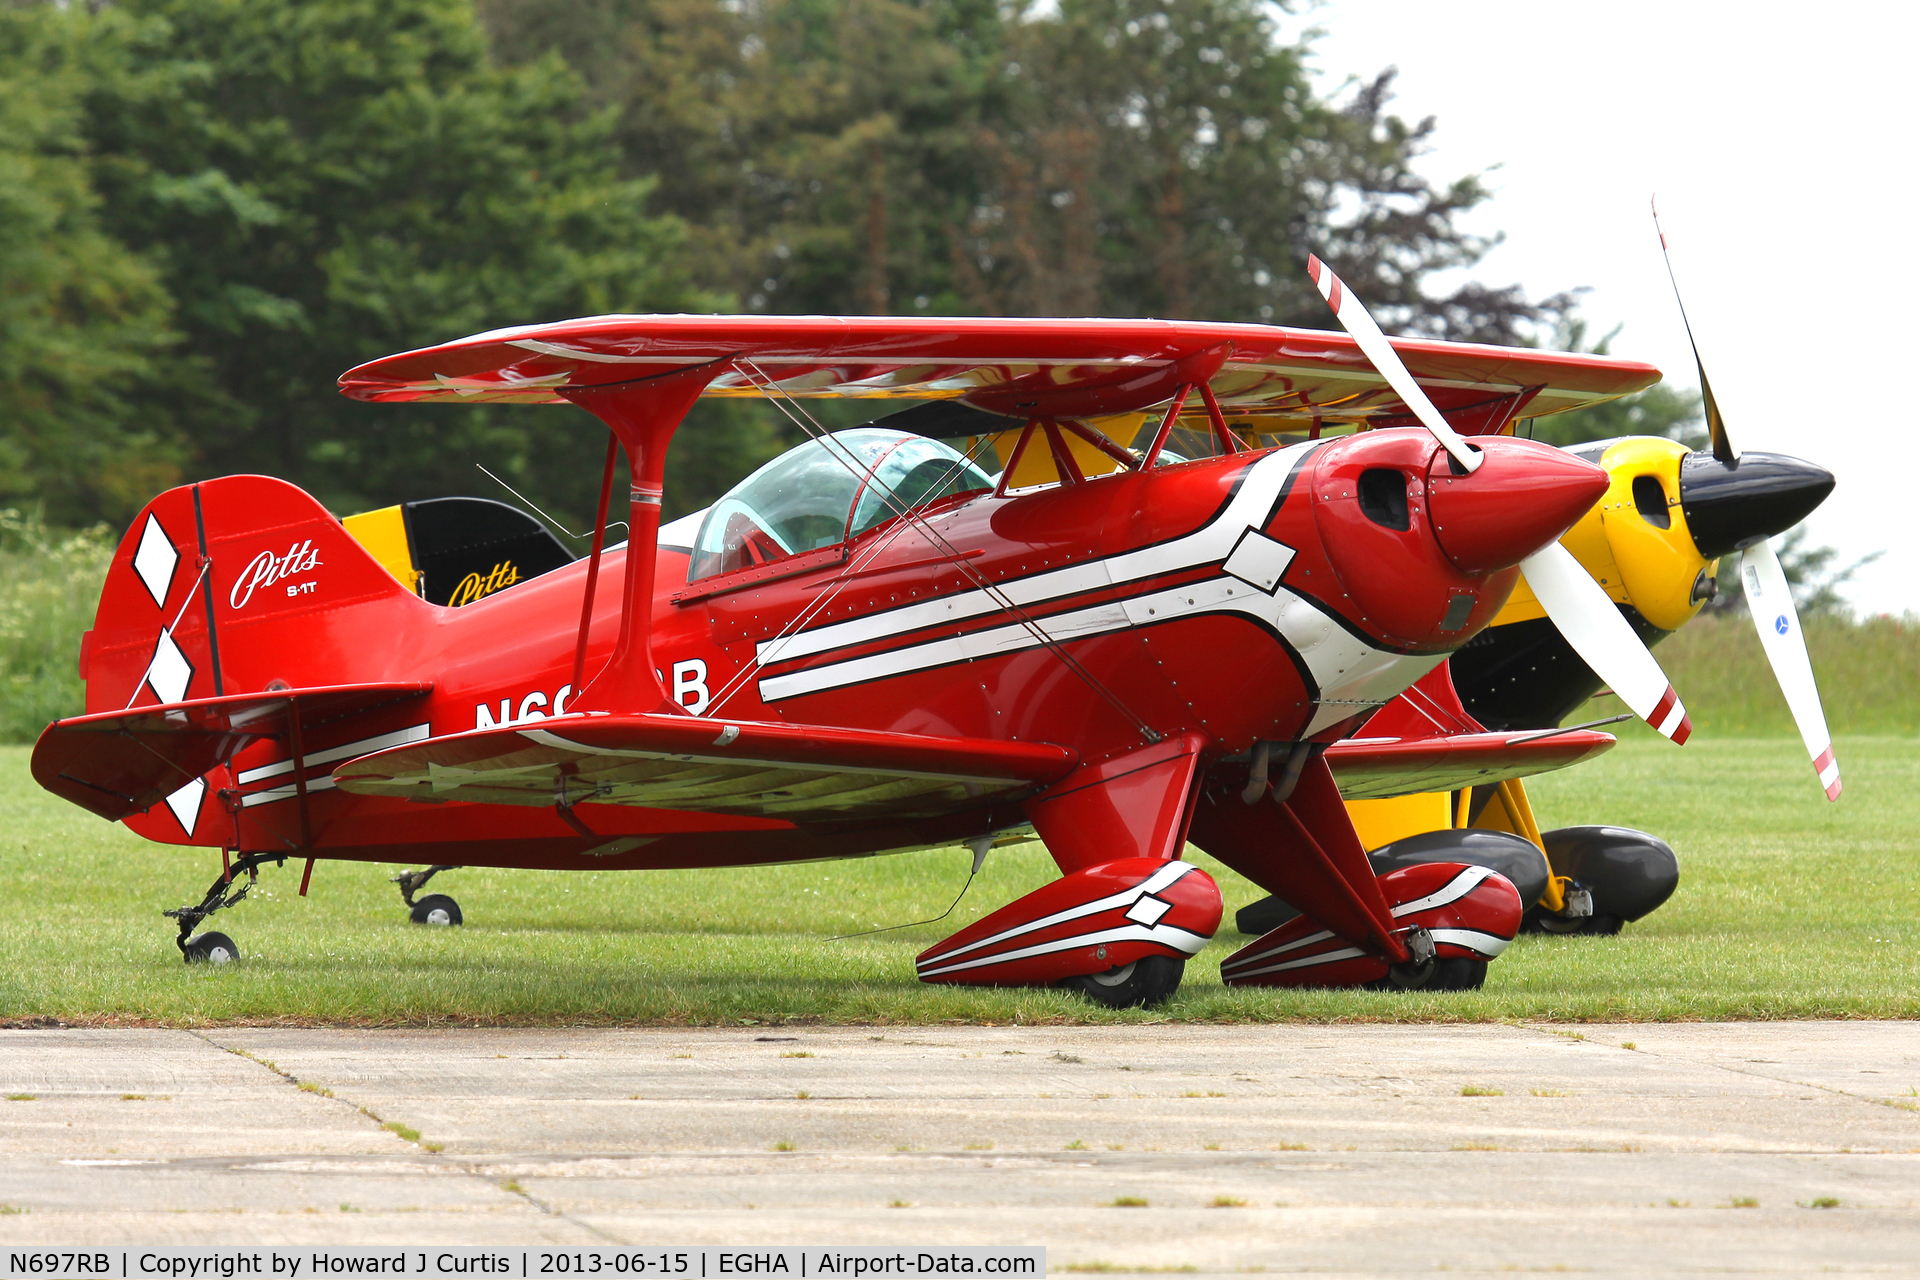 N697RB, 1986 Pitts S-1T Special C/N 1042, Privately owned, at the aerobatic competition here. With Pitts G-MAXG behind.